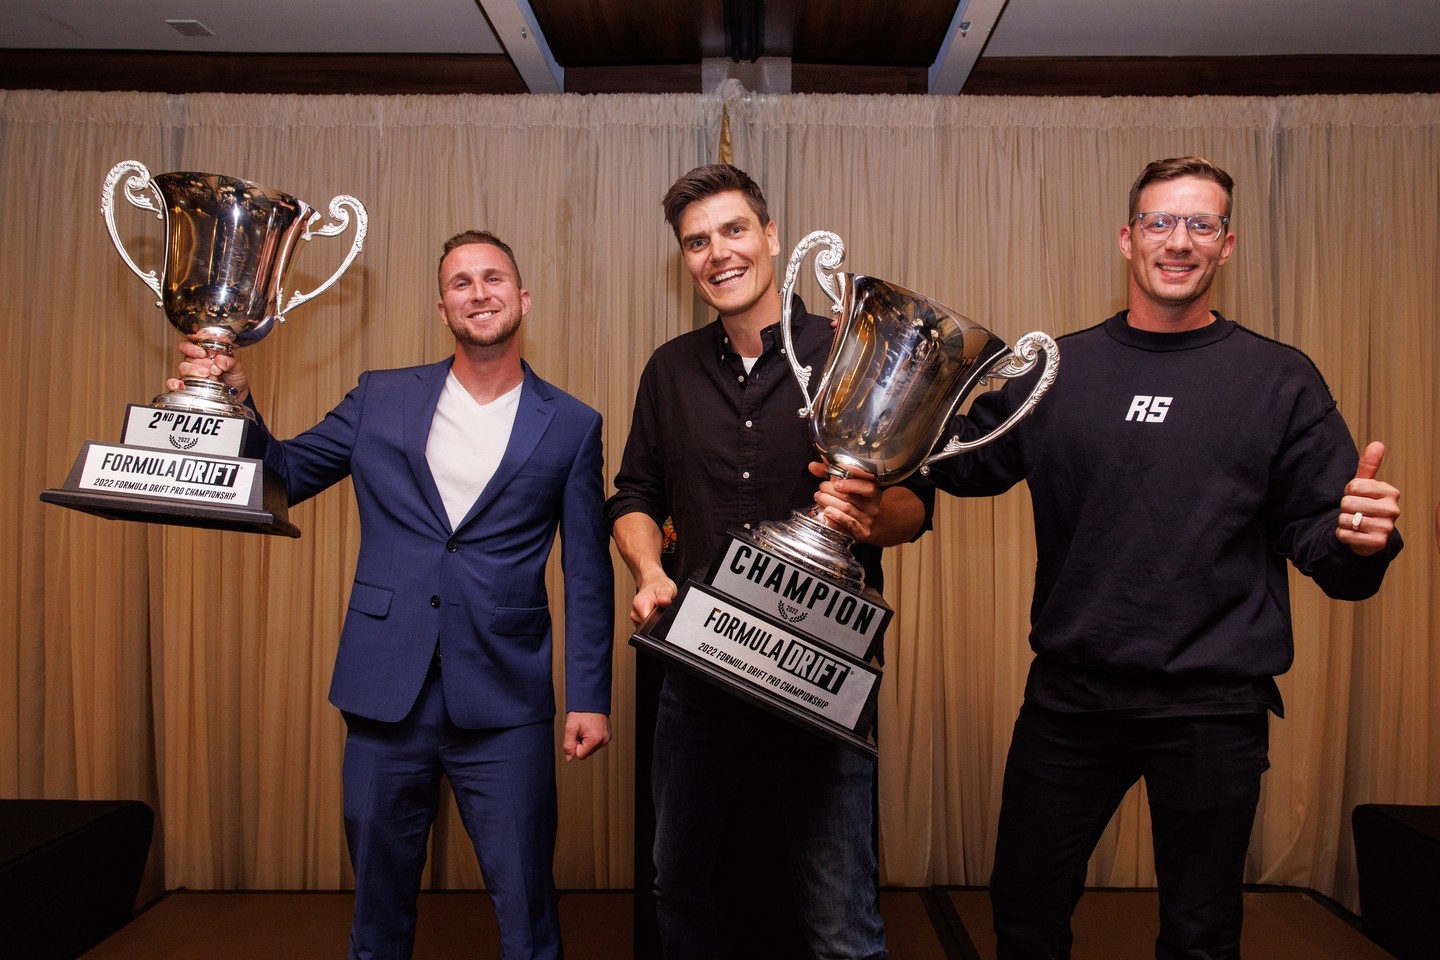 Just a few slides from our season-ending awards banquet — celebrating the drivers, teams, and all the hard-working staff involved in another unforgettable season! 

Cheers everyone 🍾 Here's to more battles in 2023!